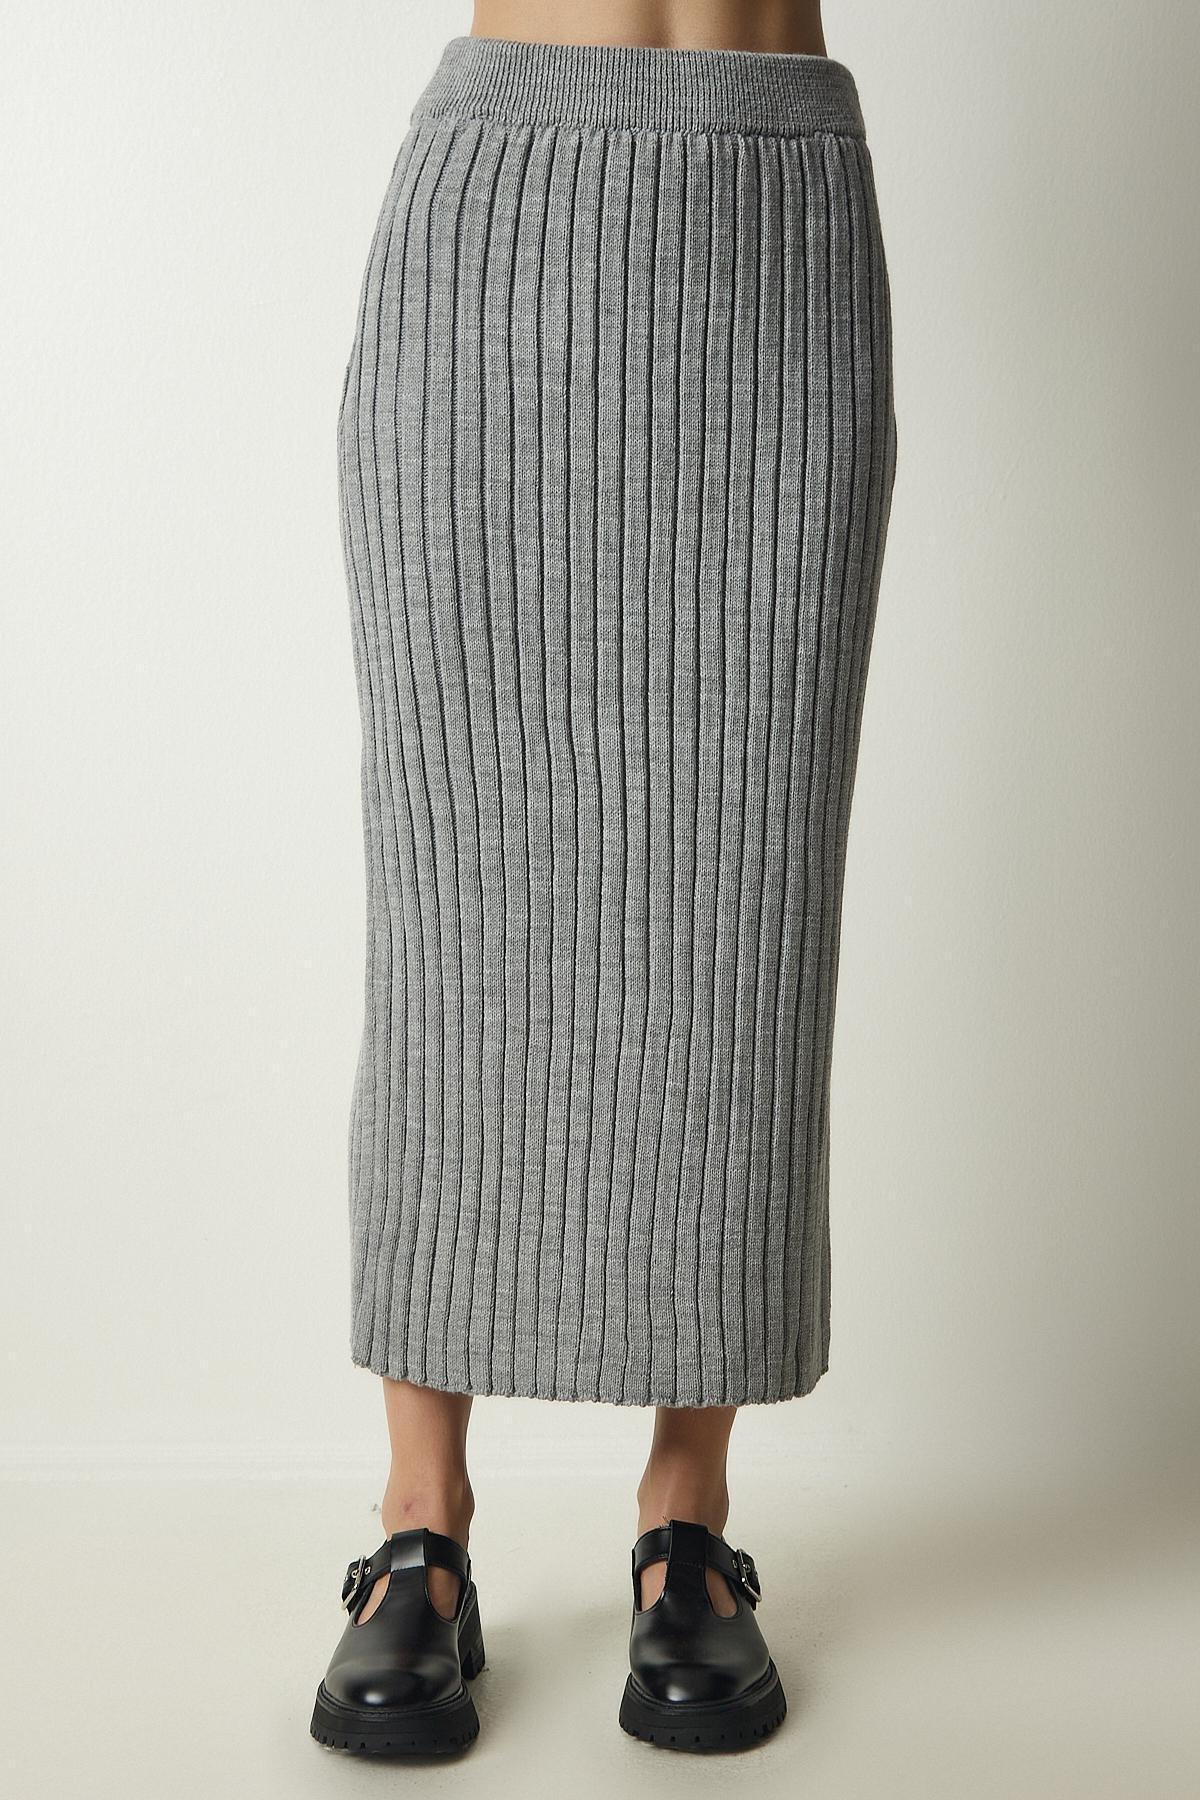 Happiness Istanbul - Grey Ribbed Co-Ord Set